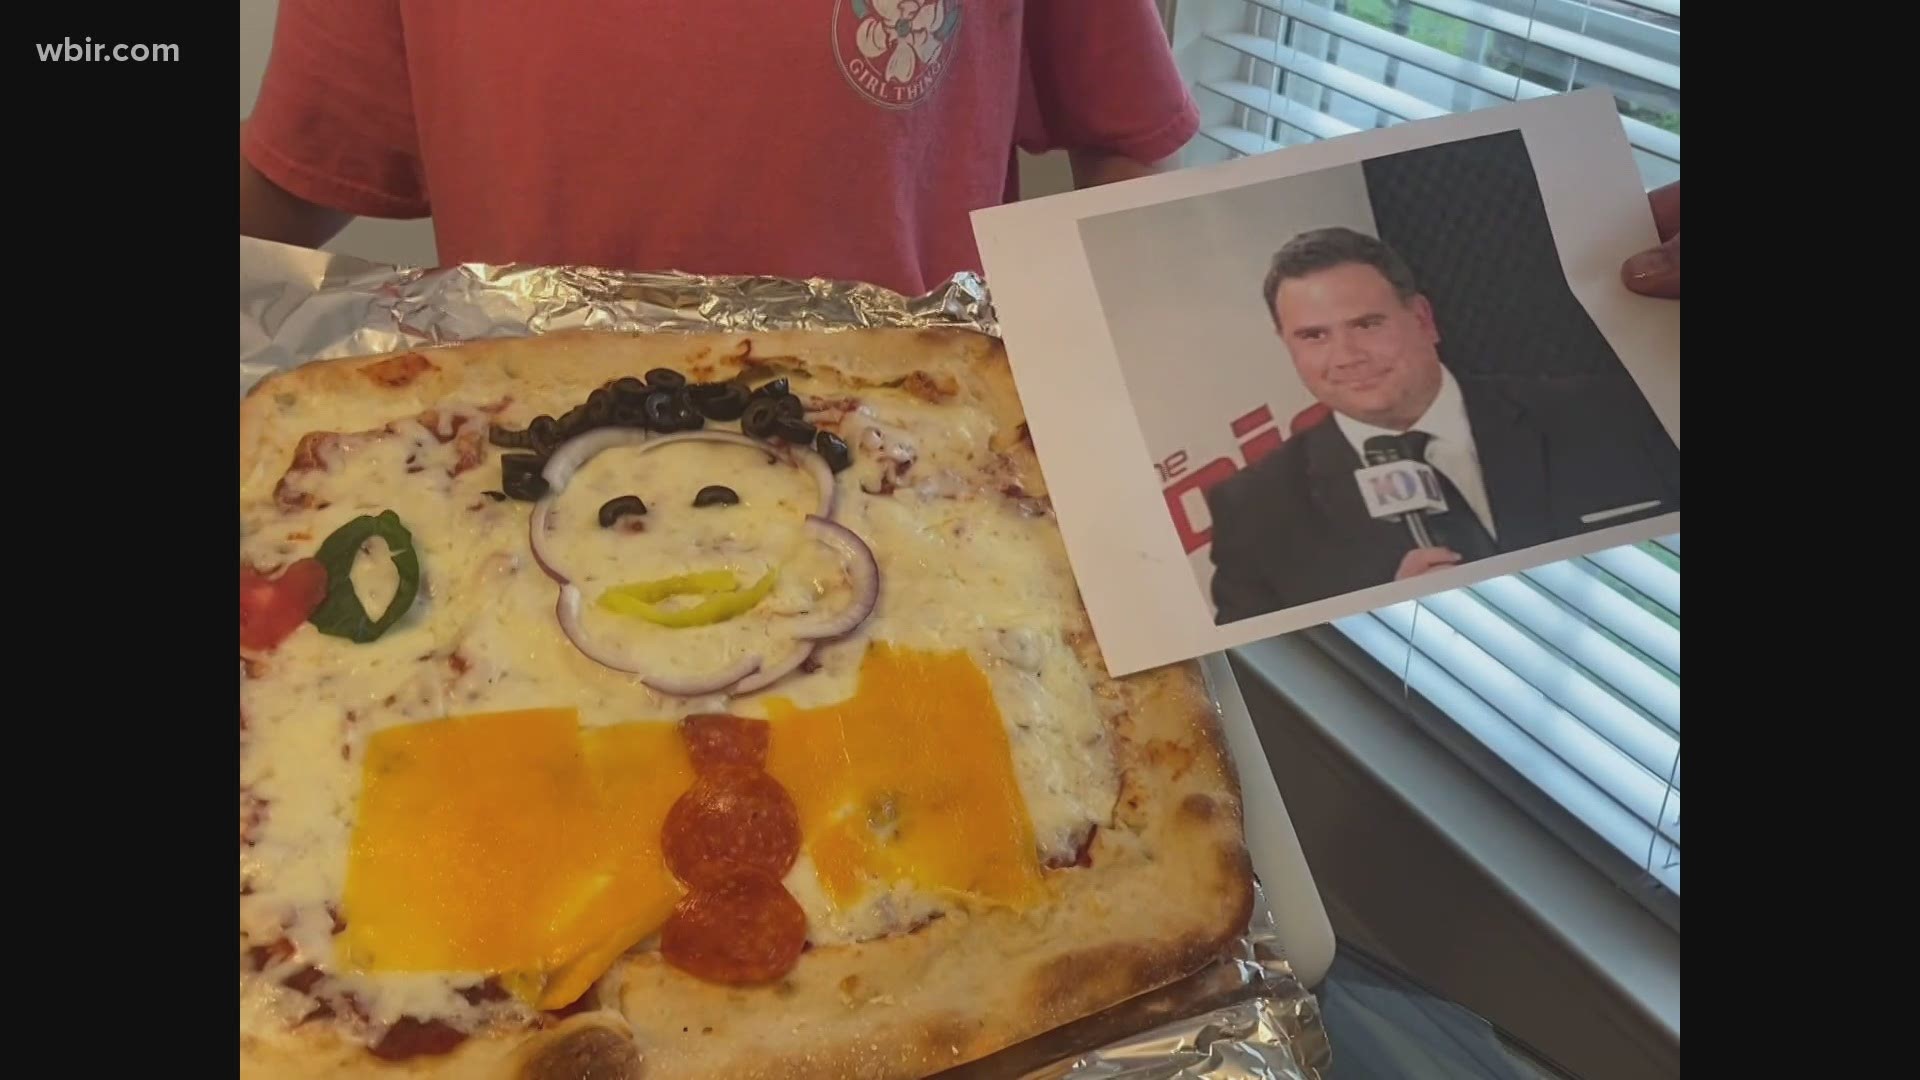 Jay Bernard with Metro Pizza and his daughter Stella make a pizza to look like Russell Biven. April 1, 2021-4pm.